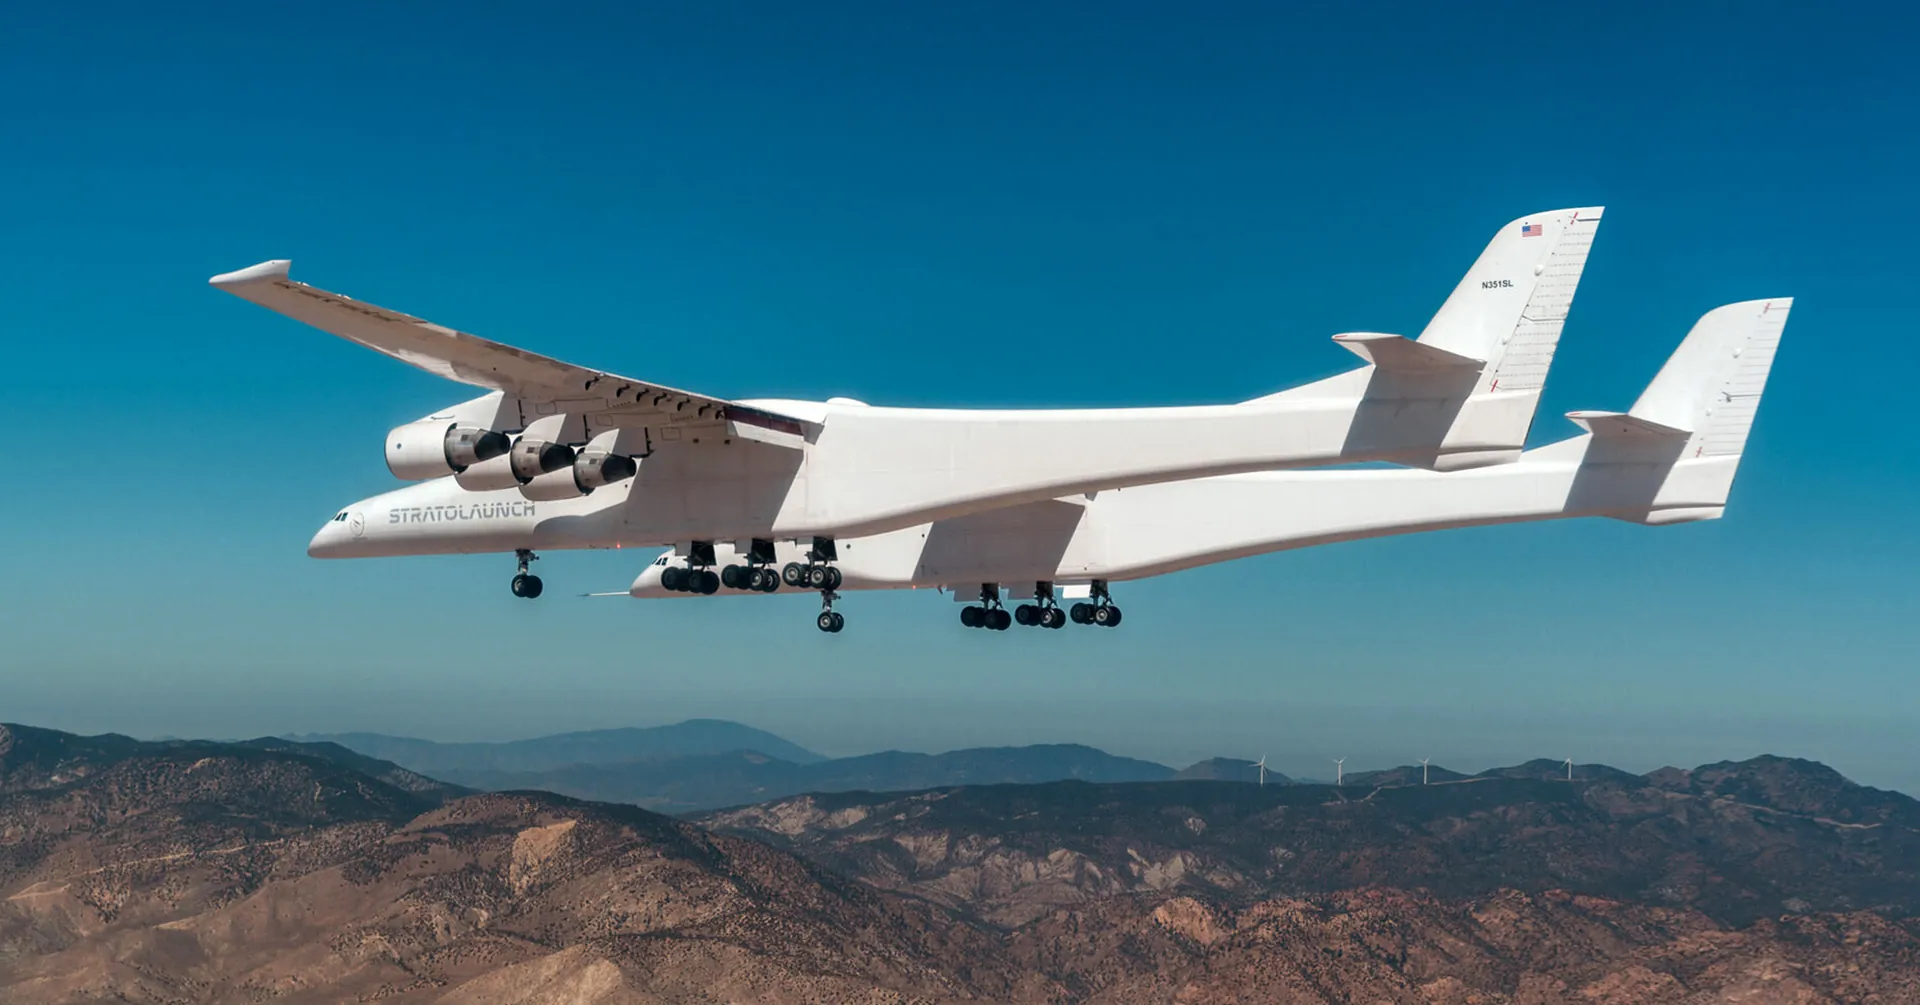 Air, Land, and Sea: Emergency Response at Stratolaunch